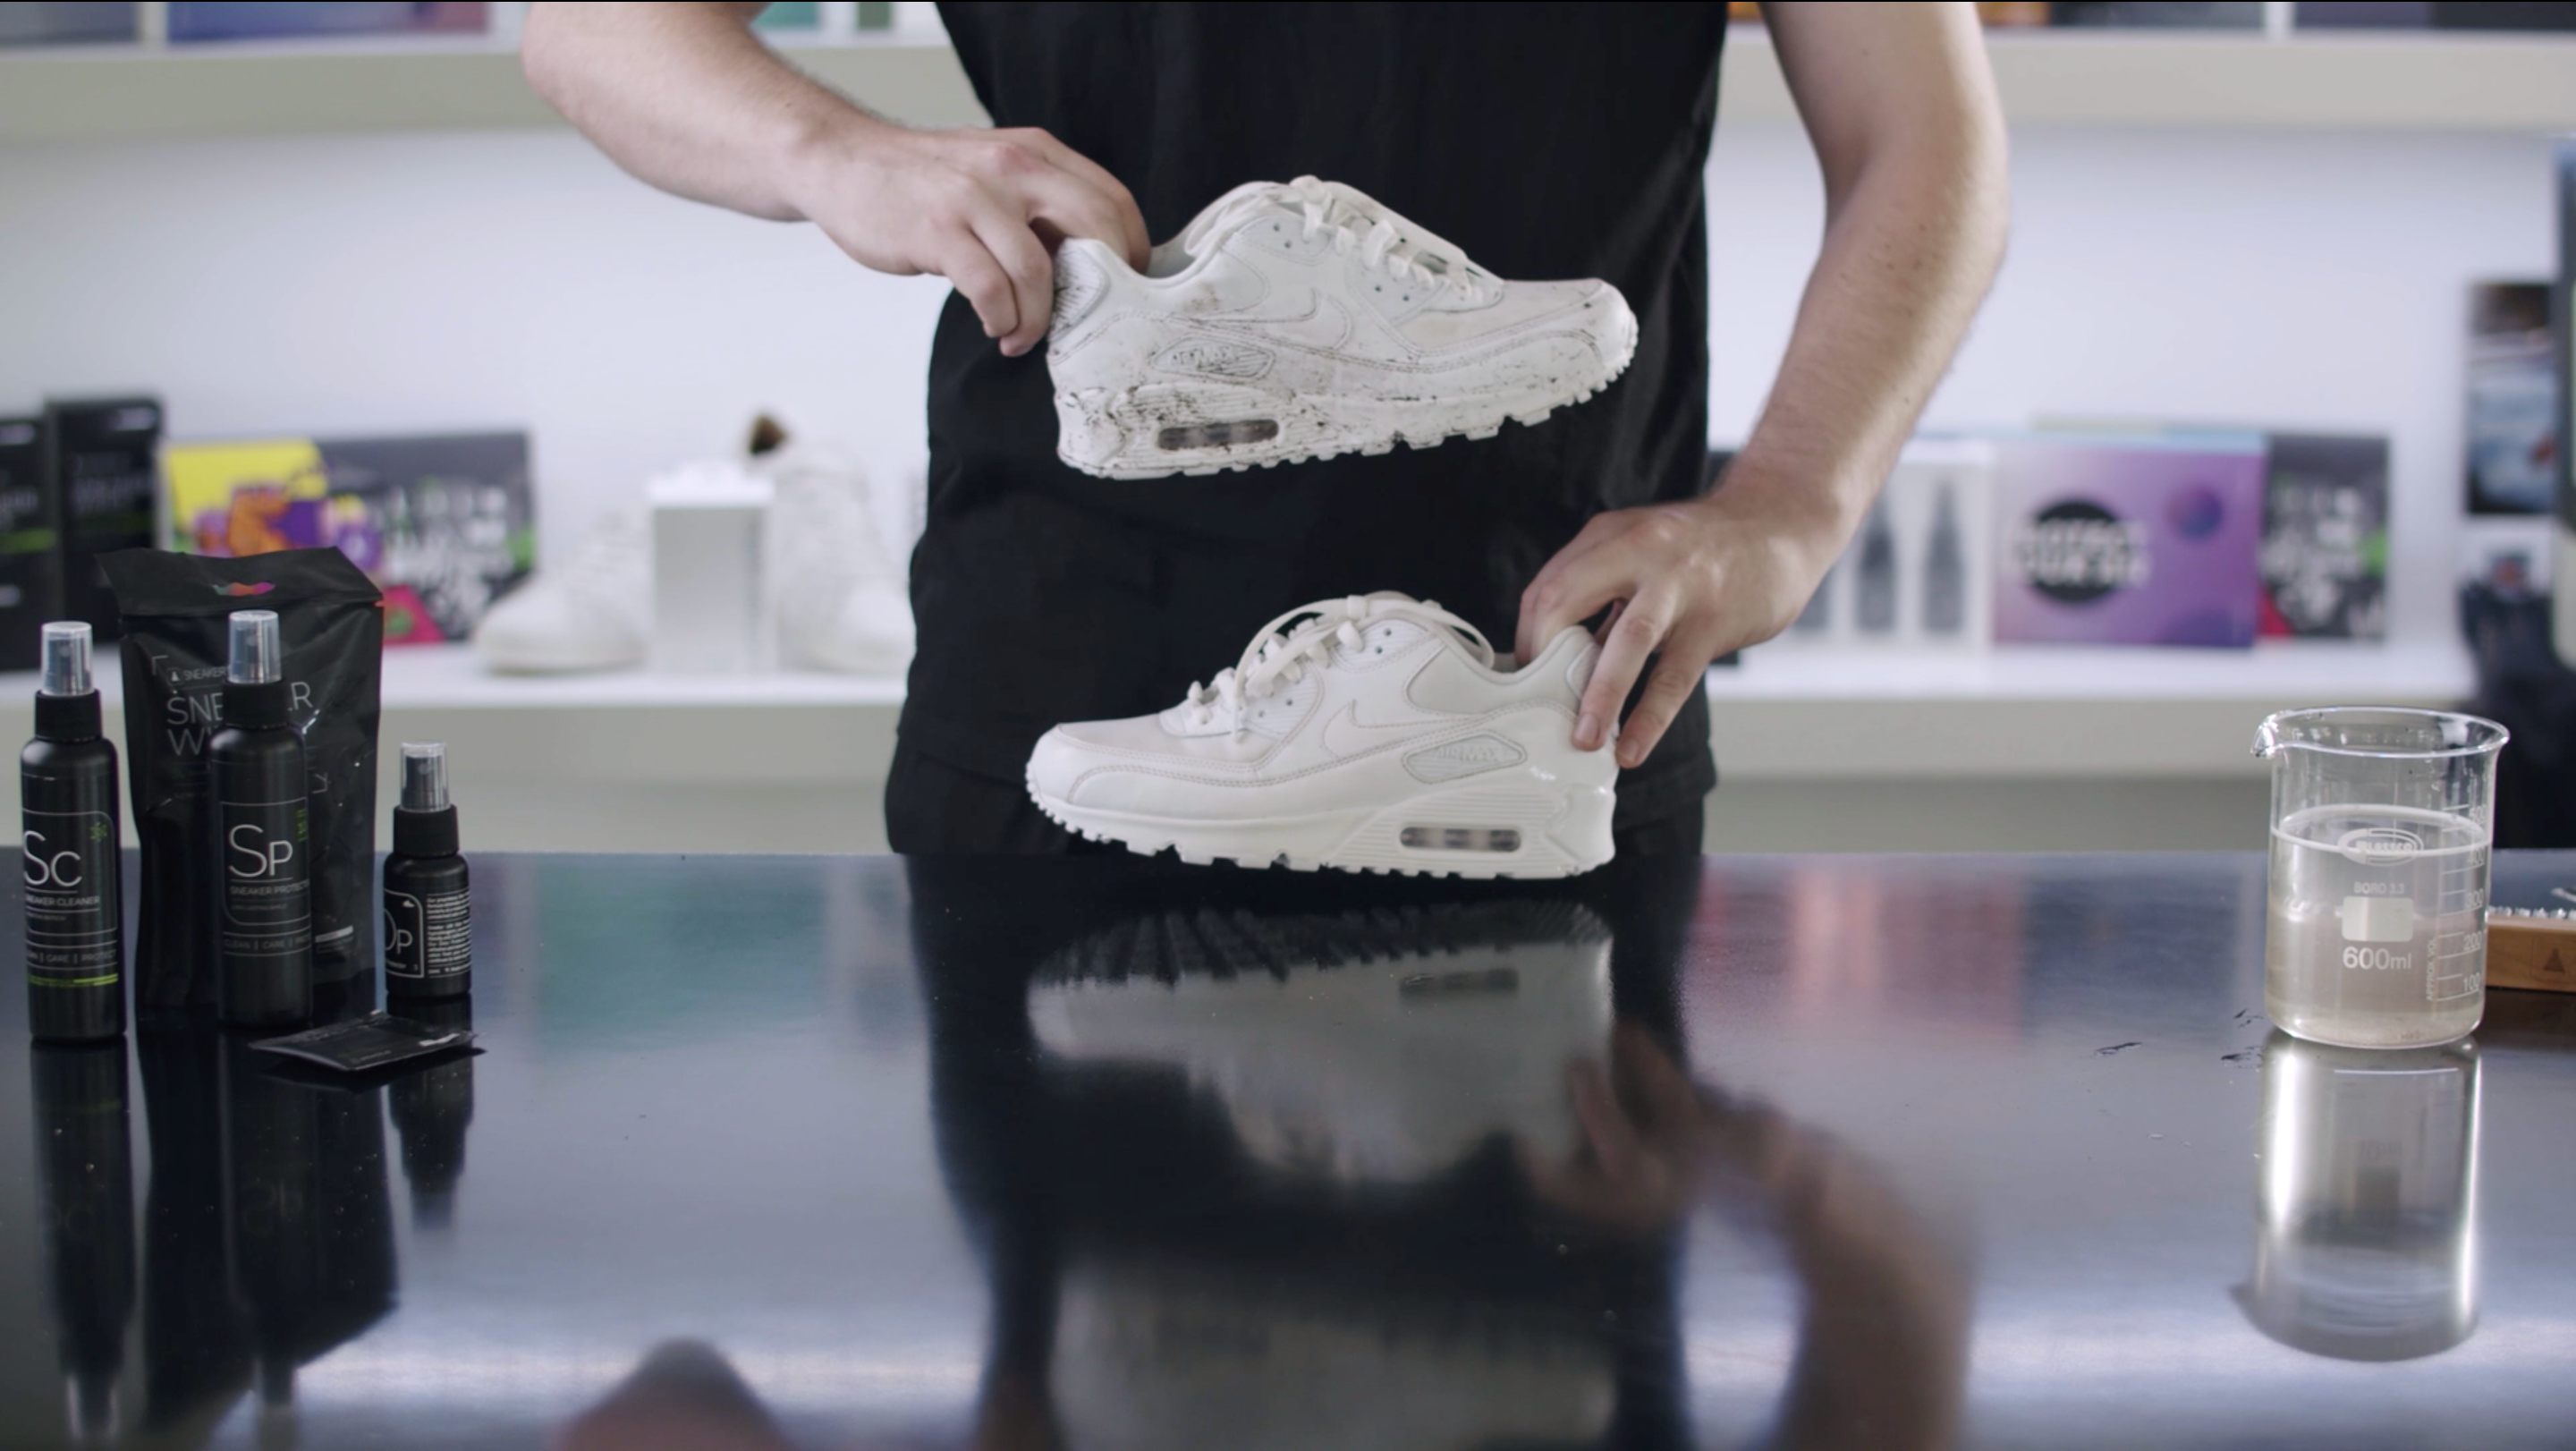 How To Clean Air Max 90